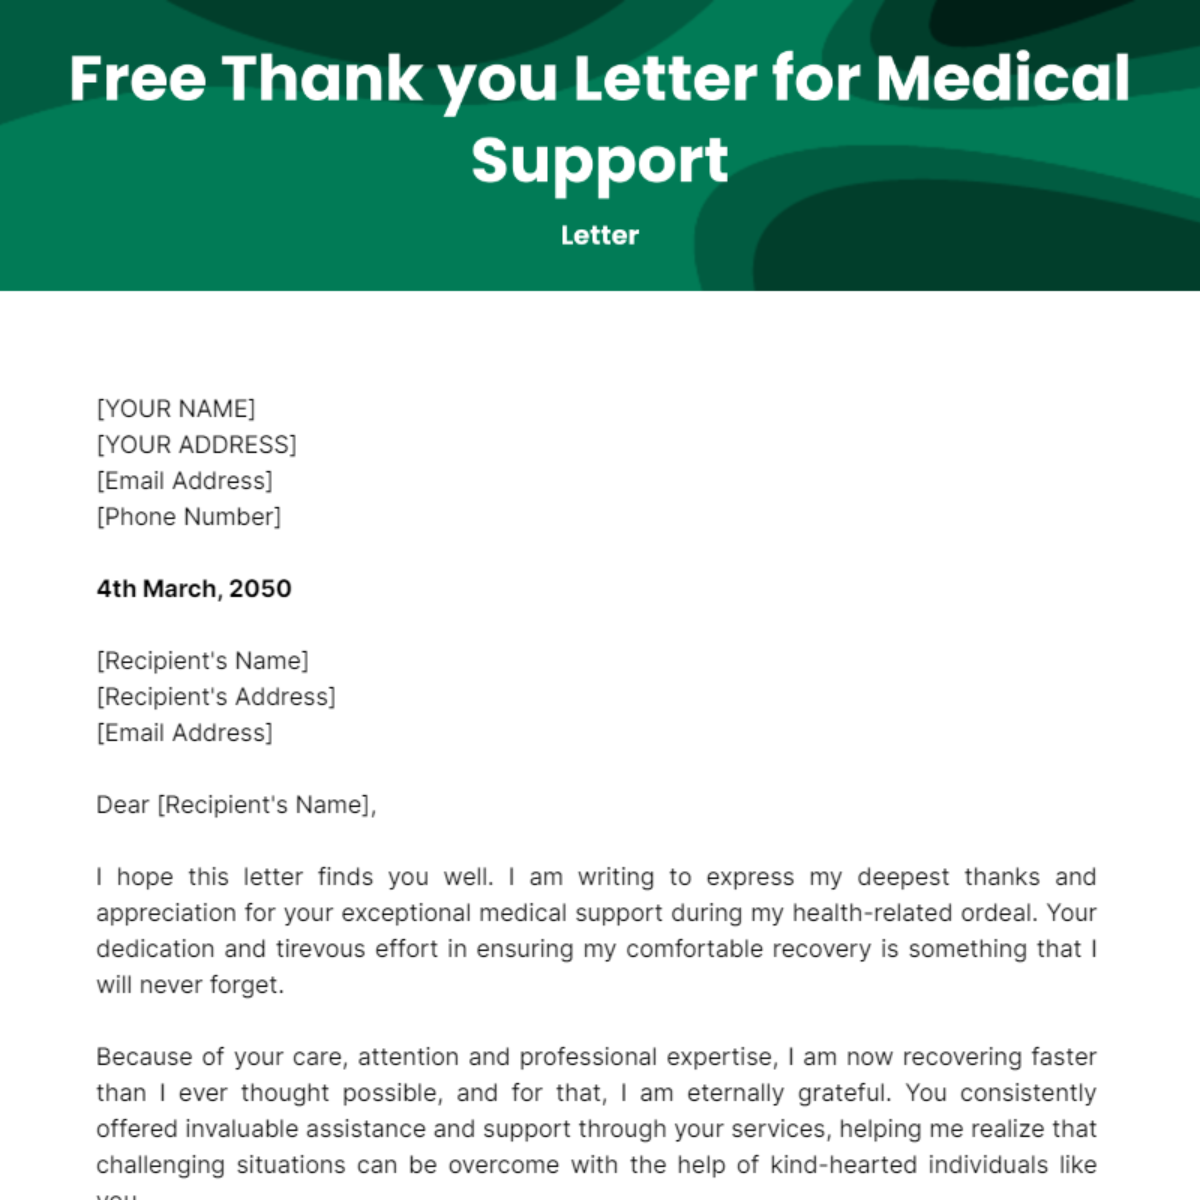 Thank you Letter for Medical Support Template